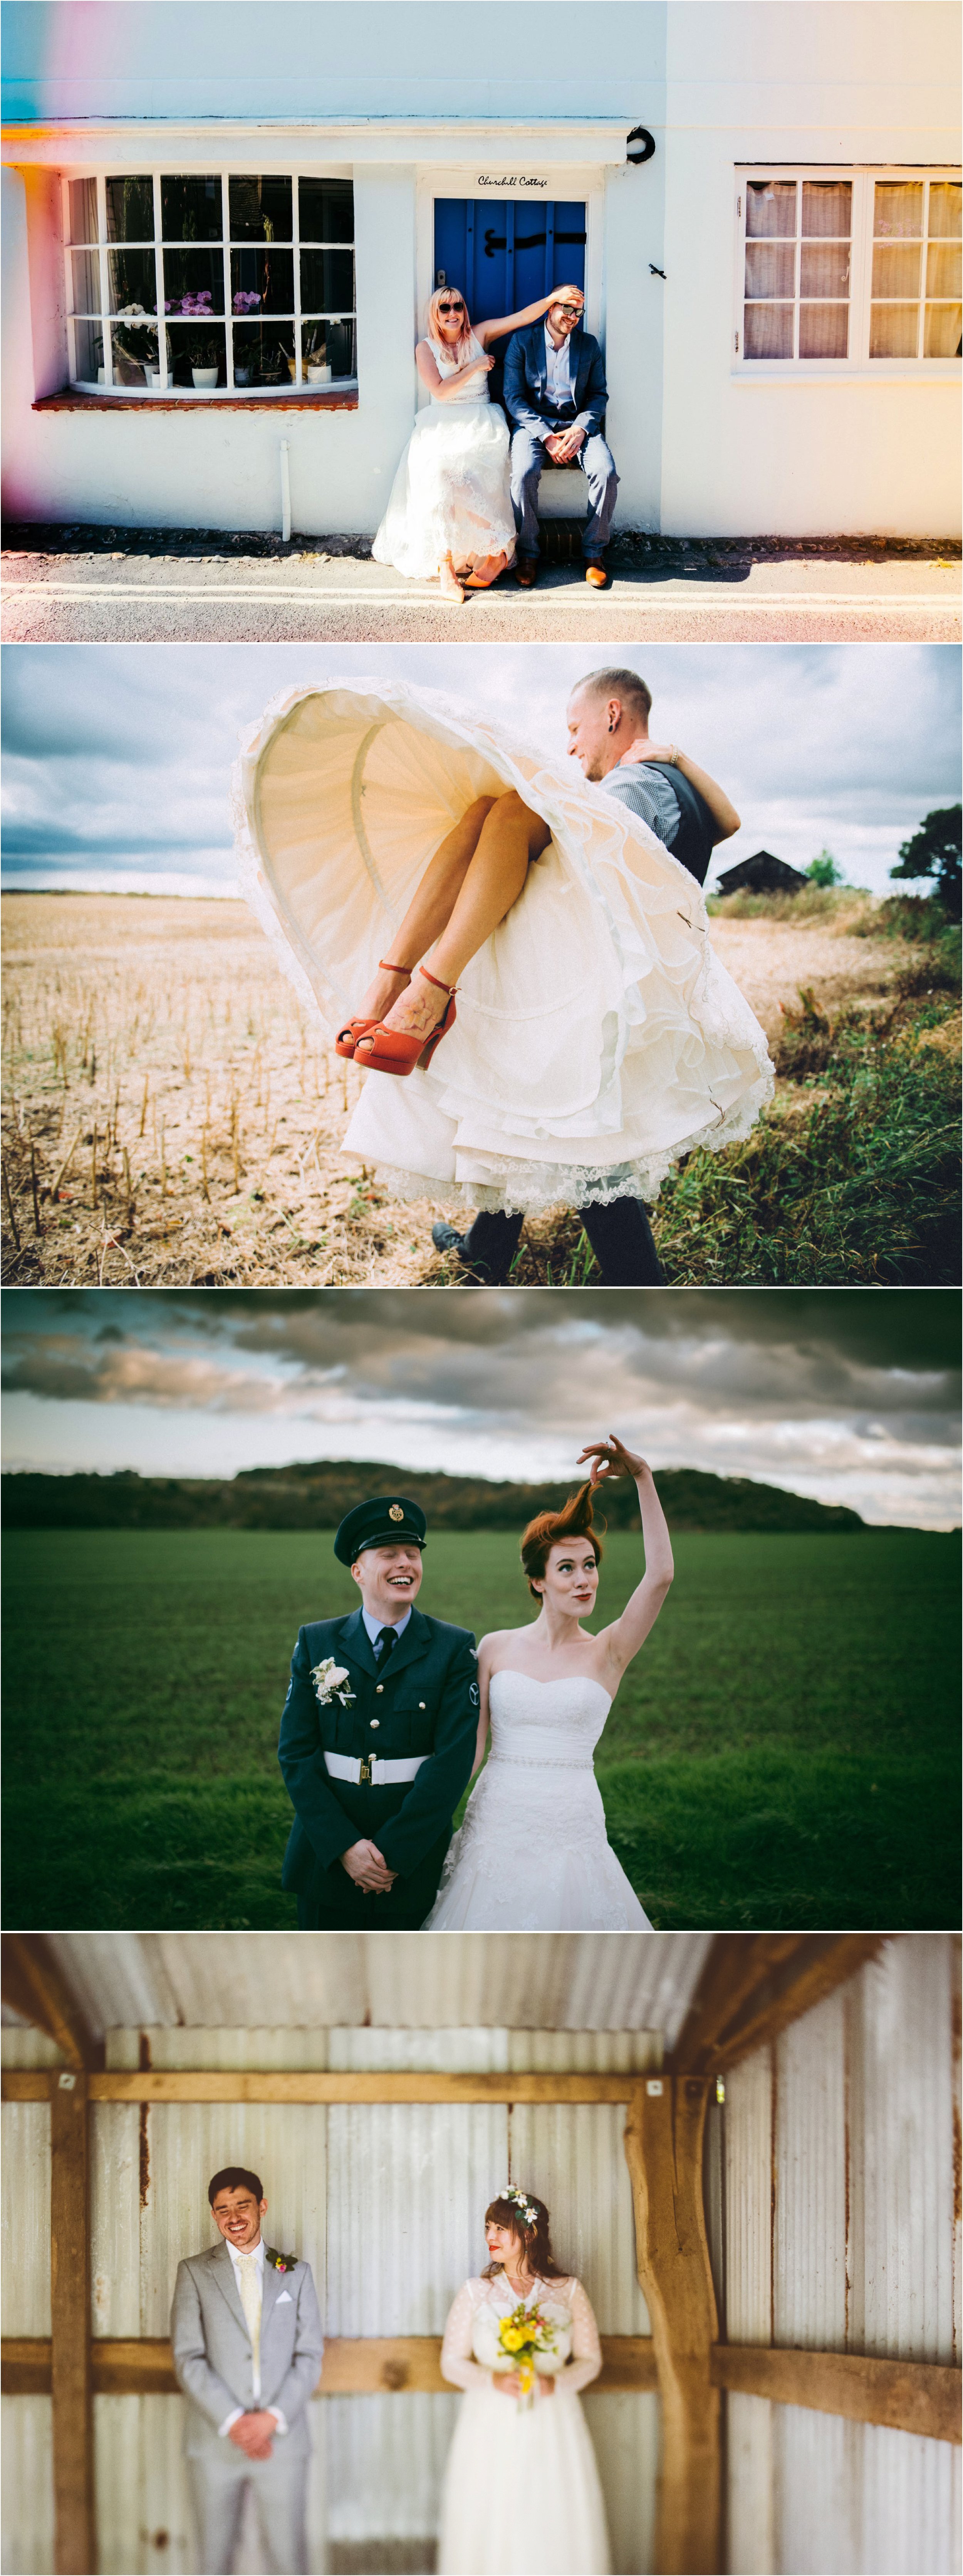 How to photograph wedding day couple portraits_0028.jpg